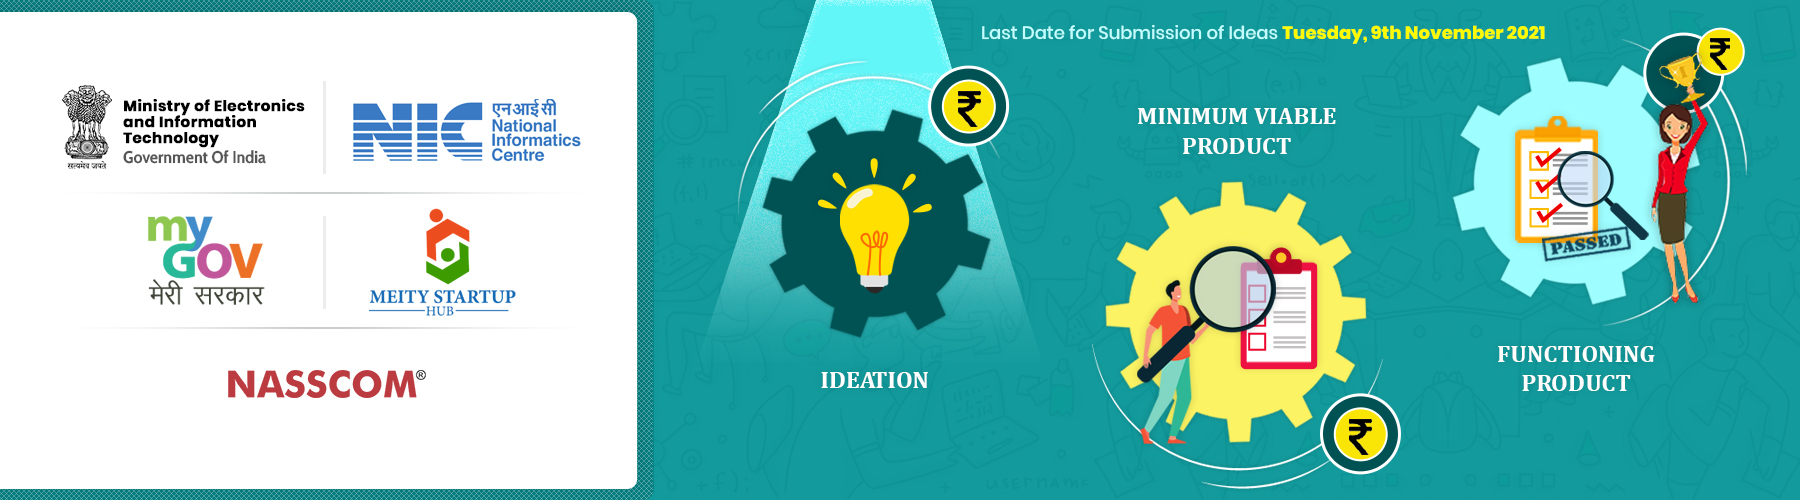 Ministry of Electornics & Information Technology, NIC, MyGov, MeitY Startup Hub, NASSCOM collaborate to invite Startups